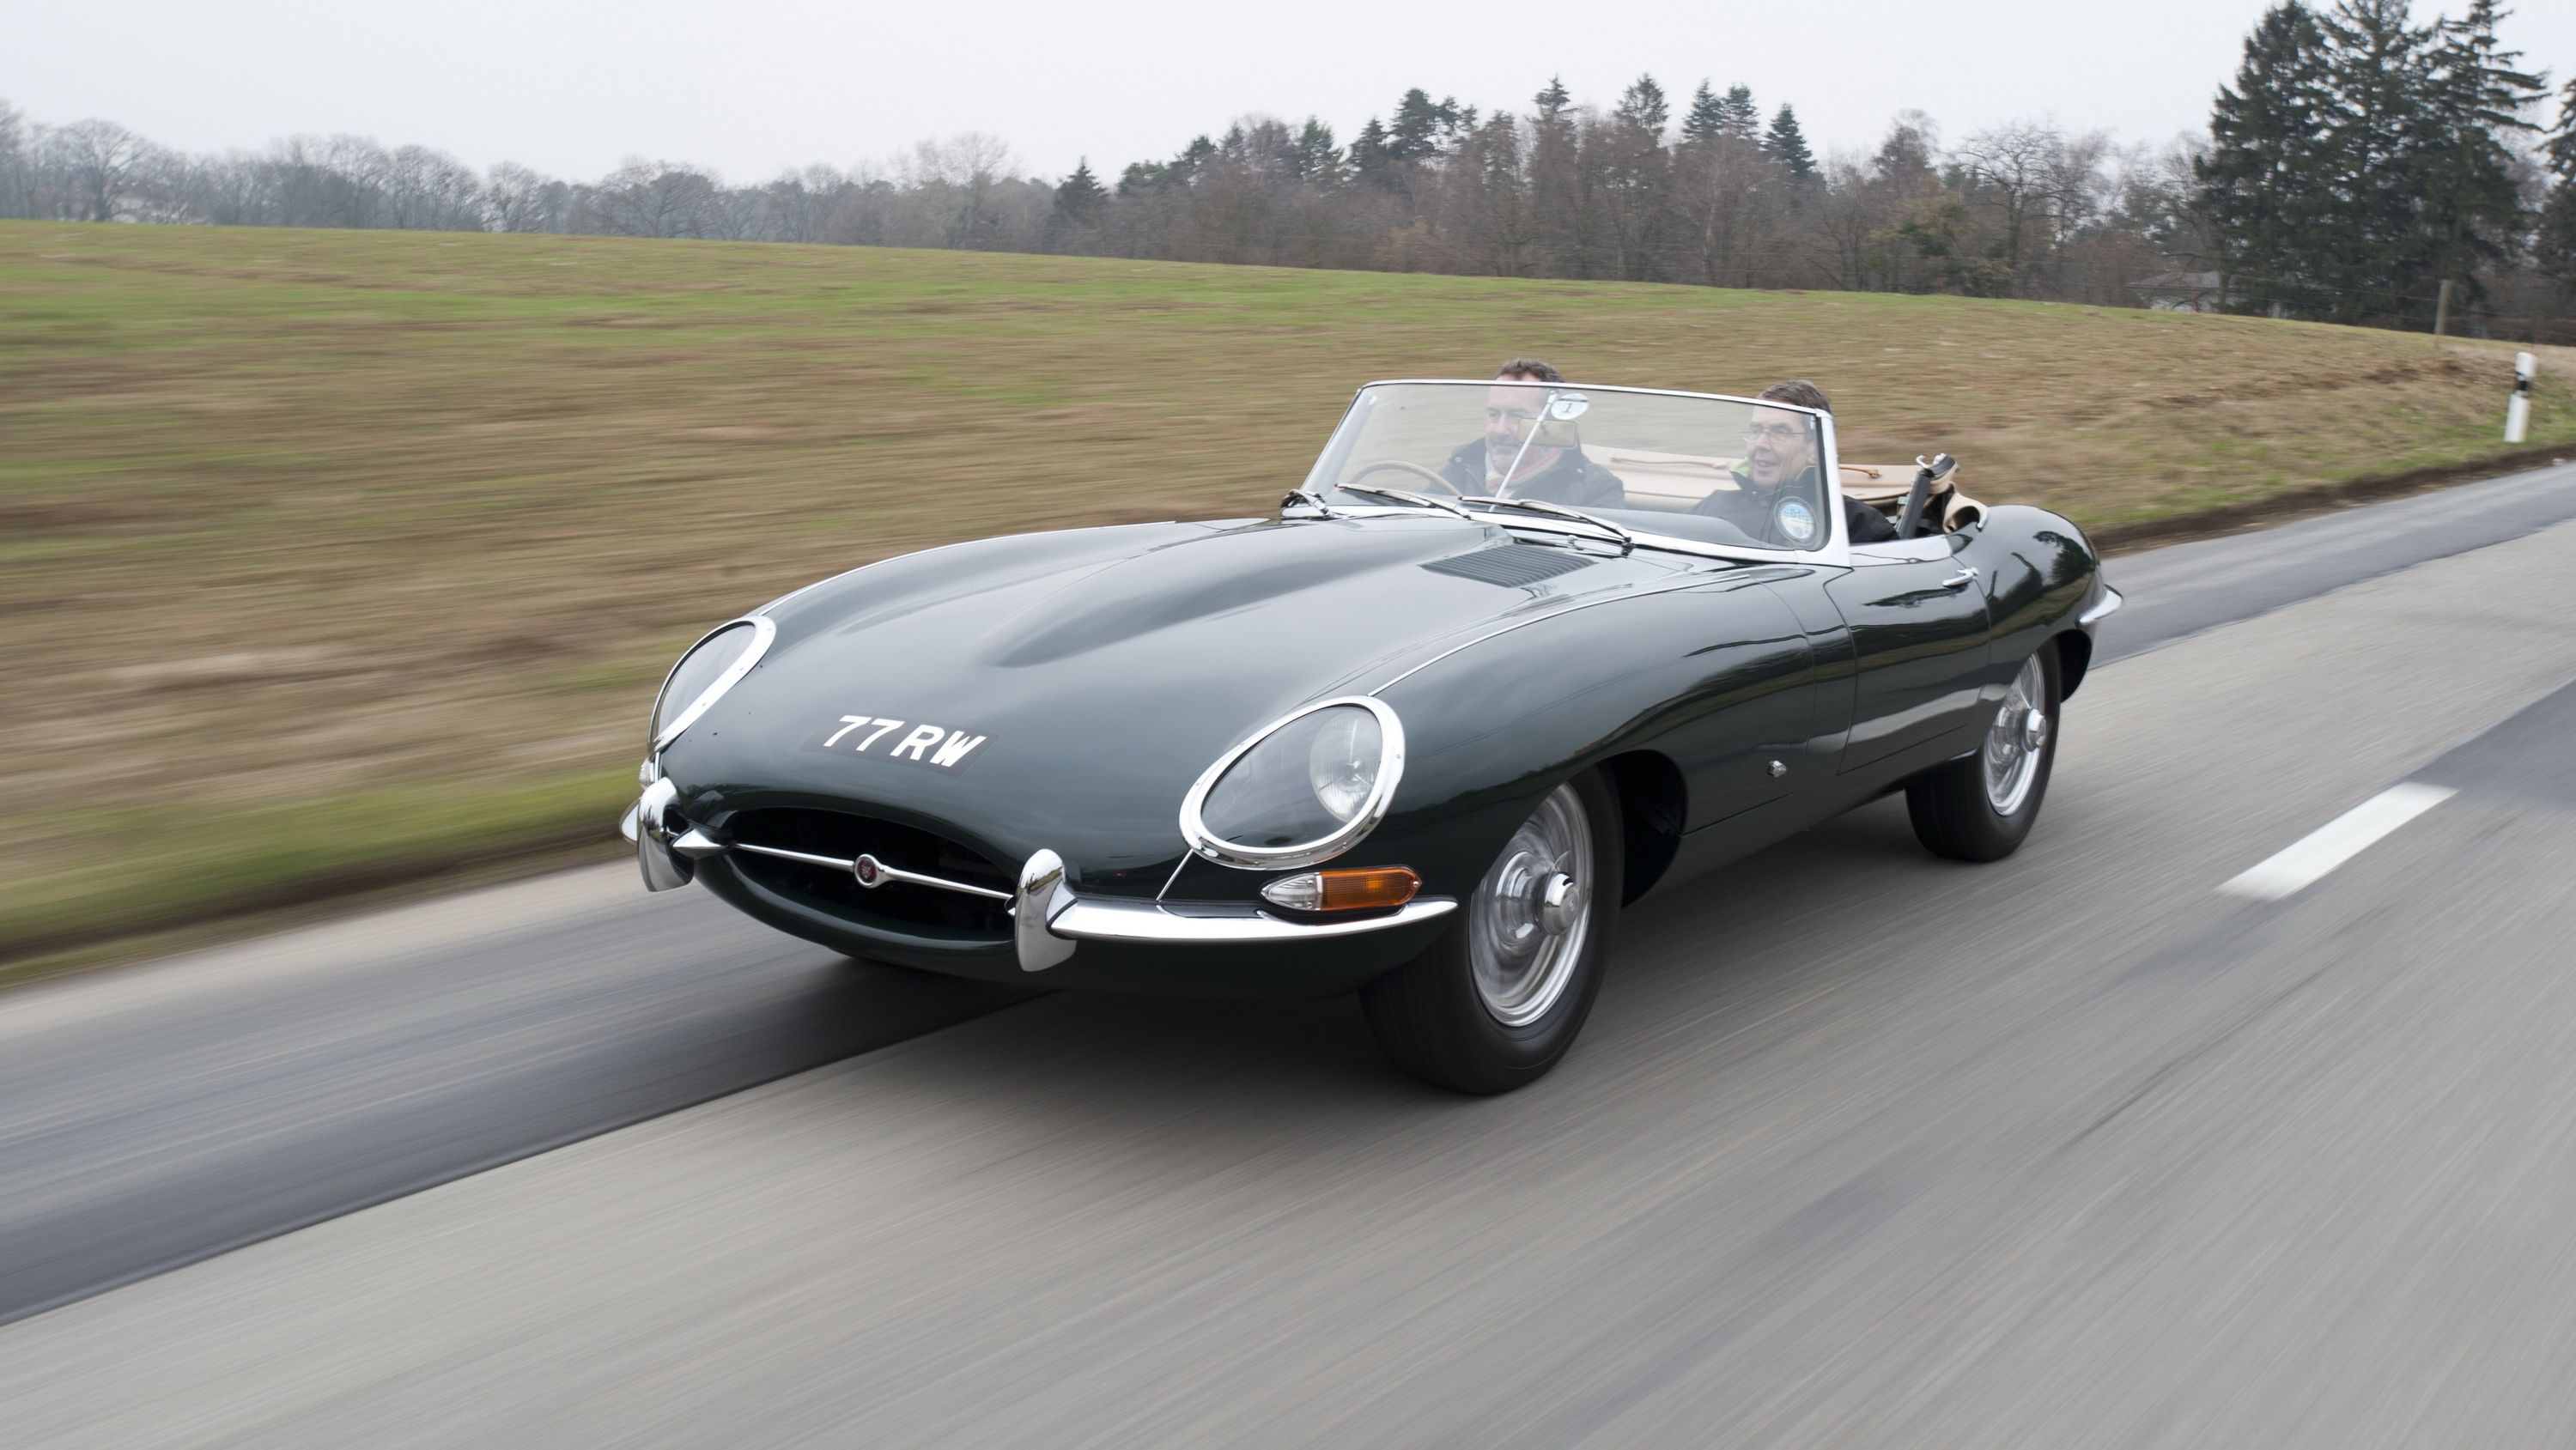 A classic jaguar e-type on the highway